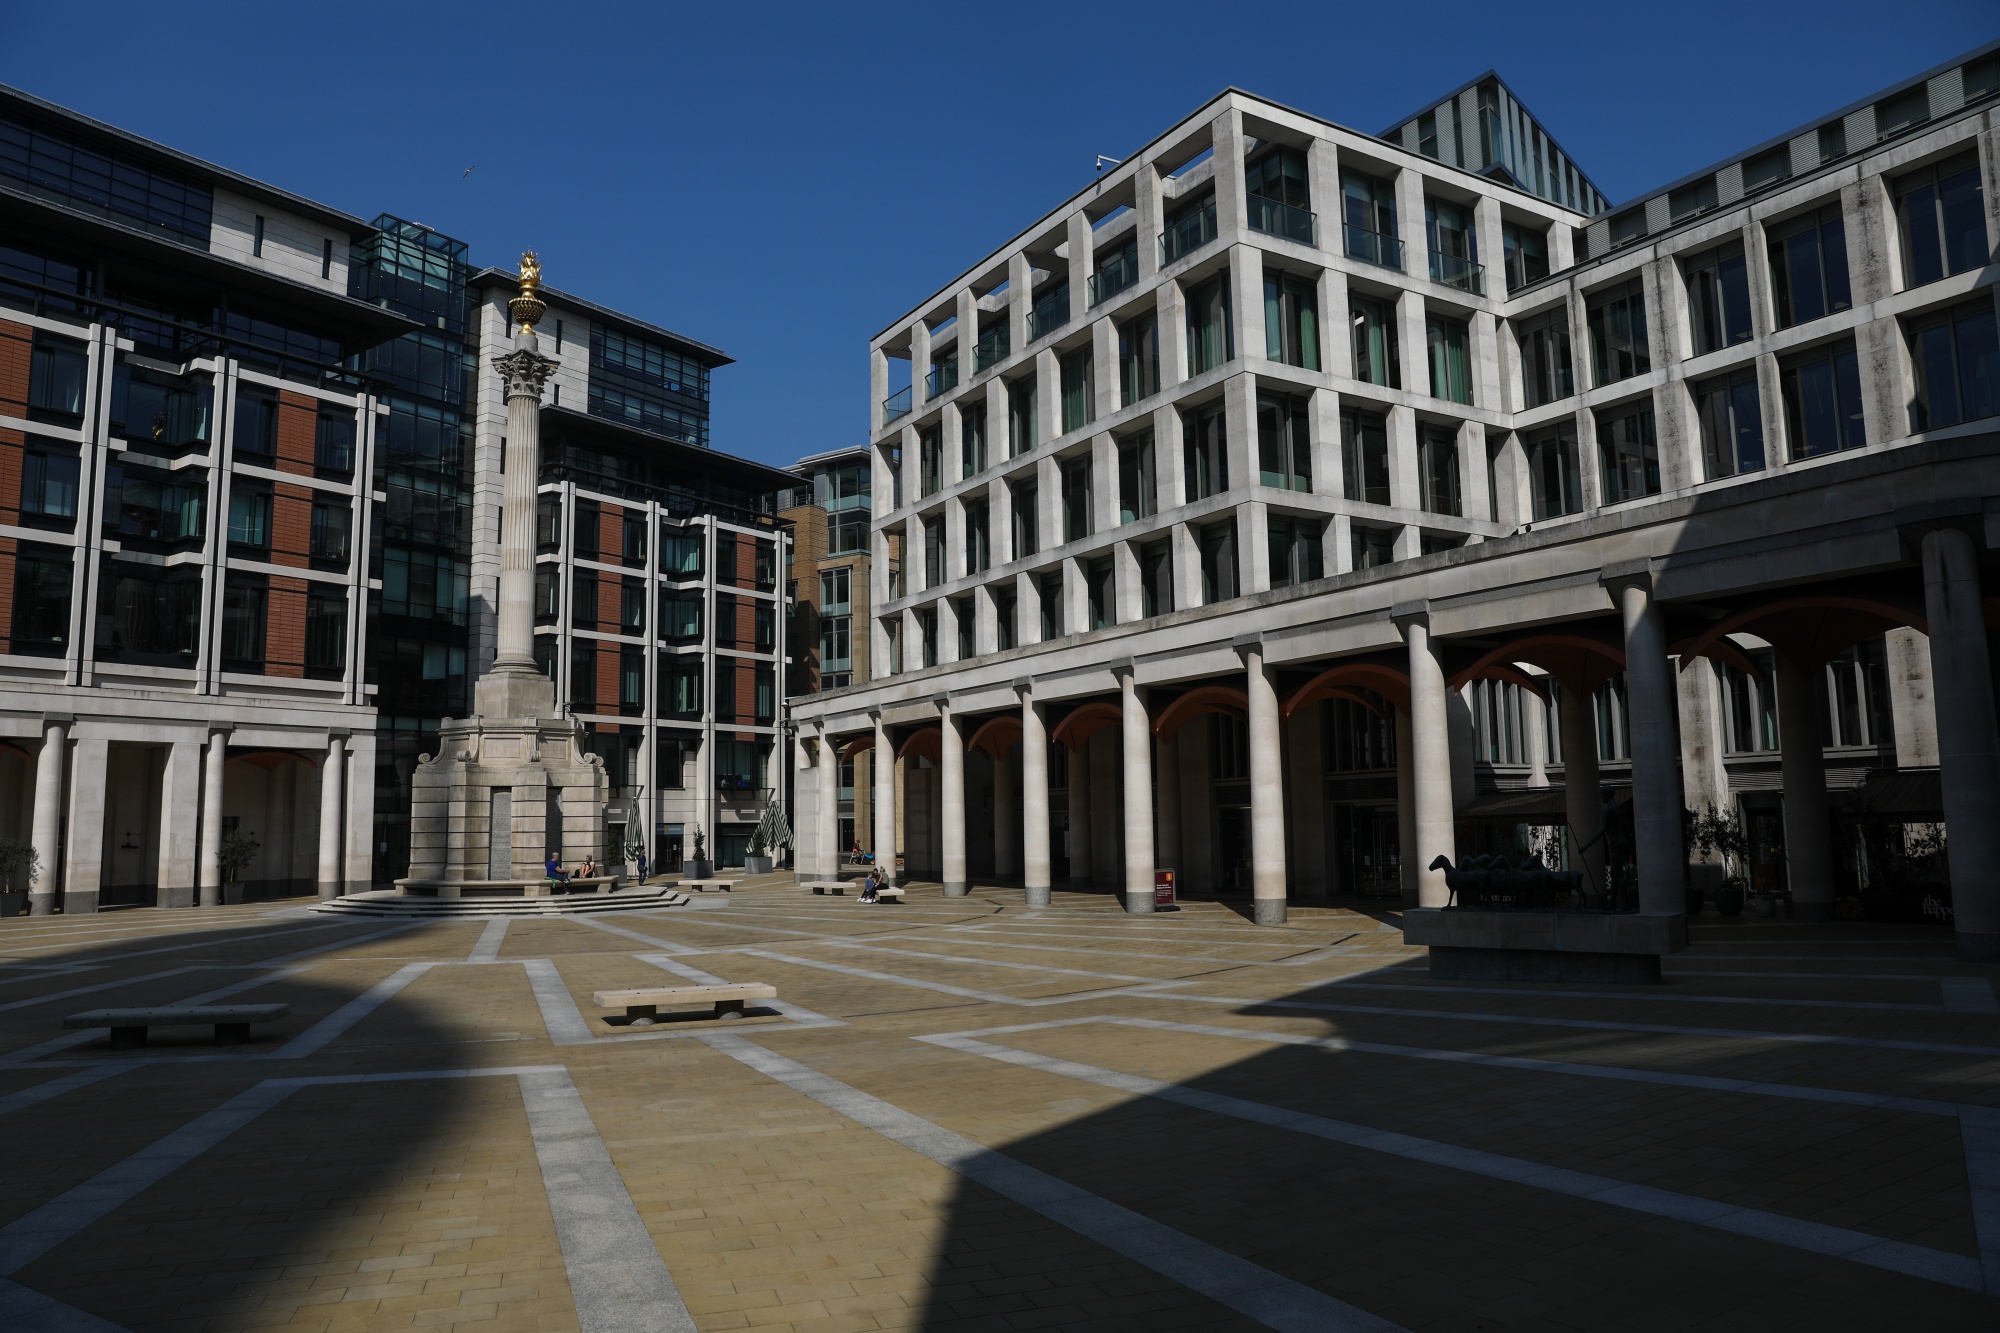 The London Stock Exchange in Paternoster Square in London.